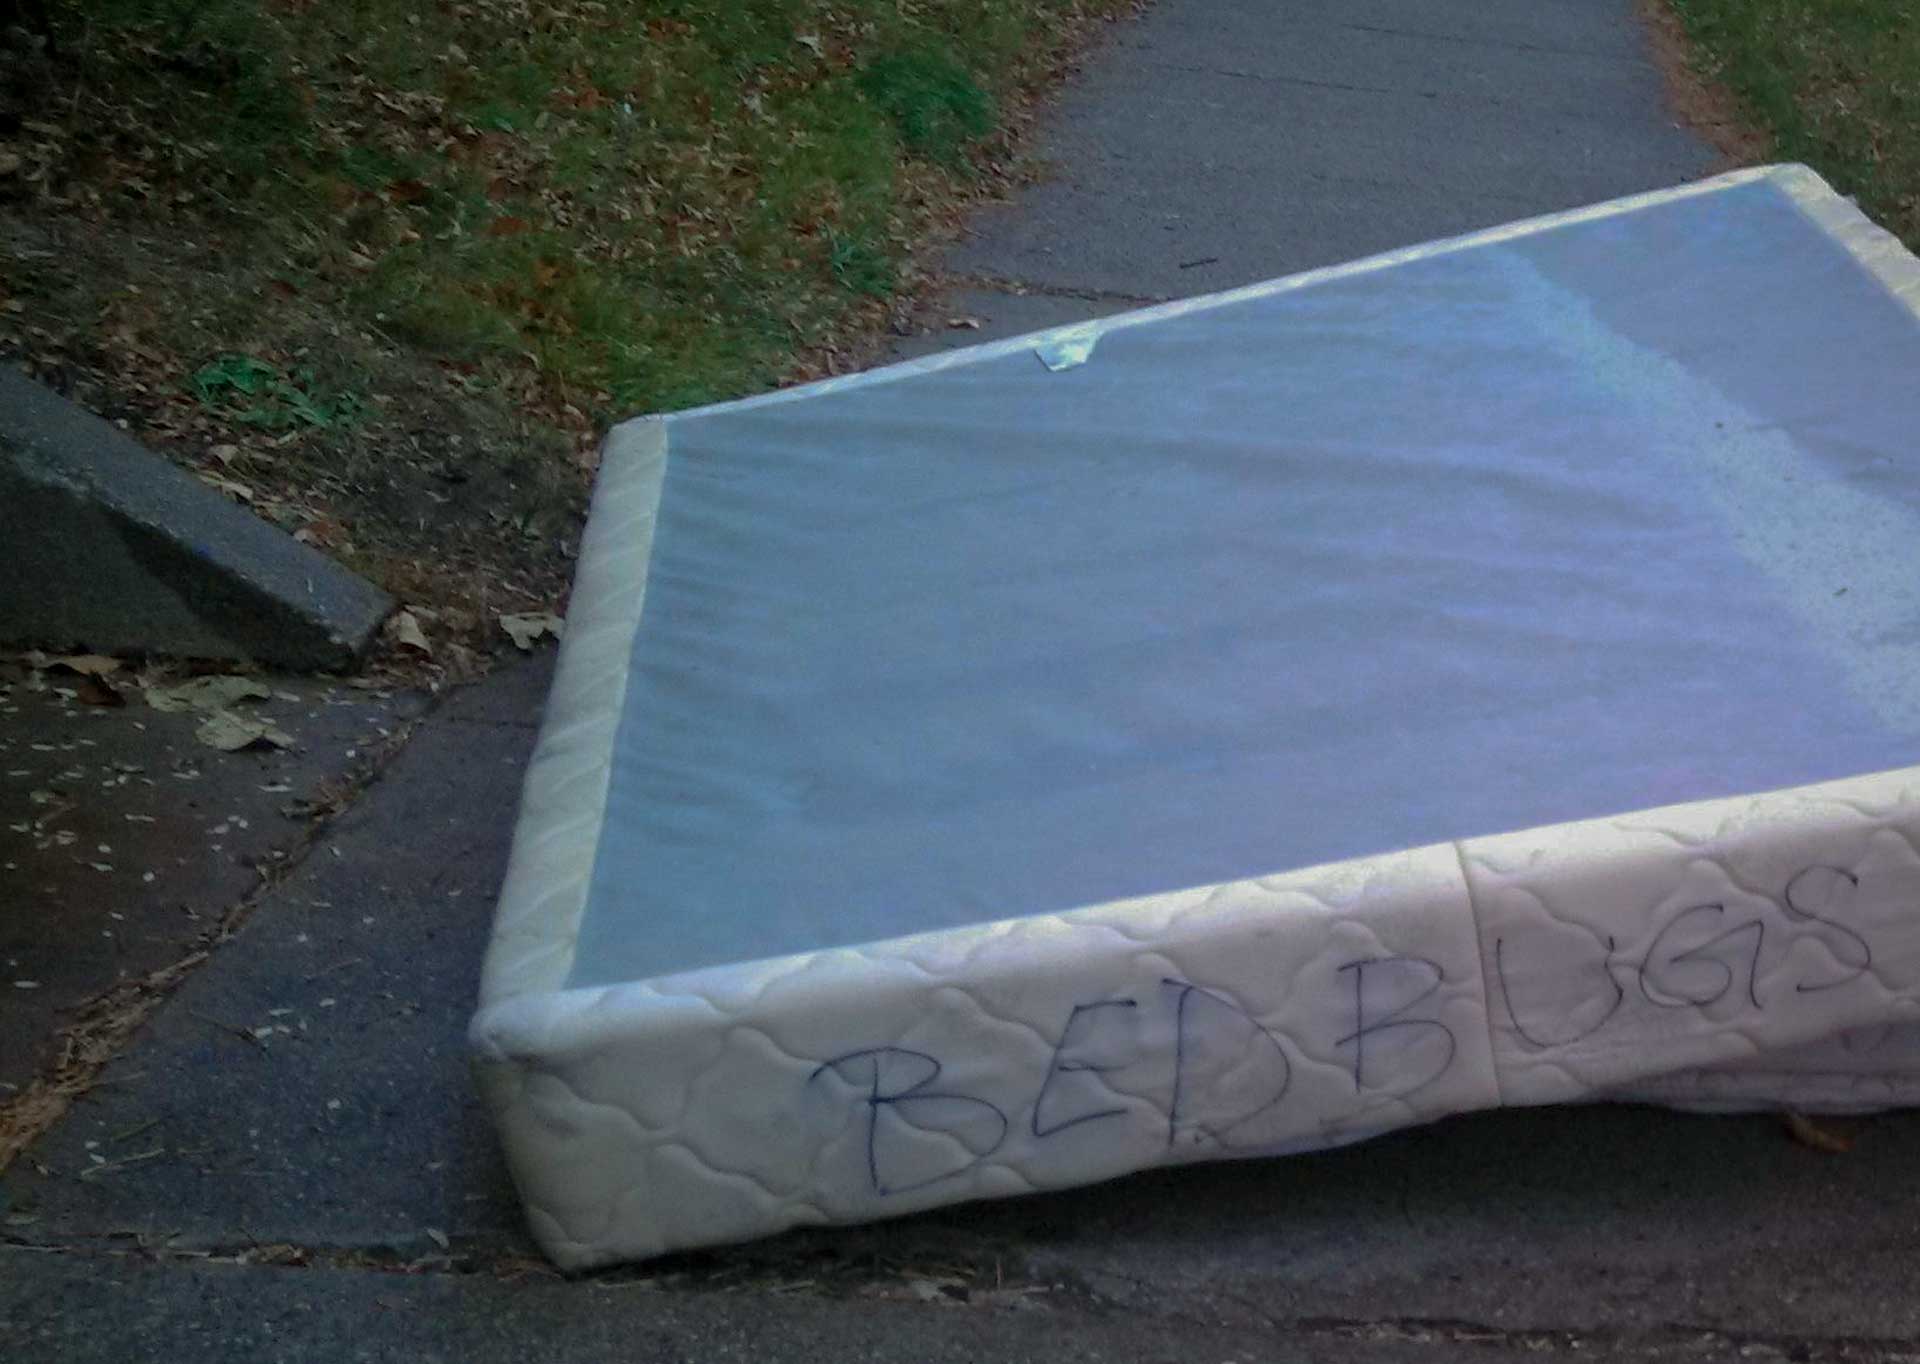 A Box Spring discarded by the curtsied